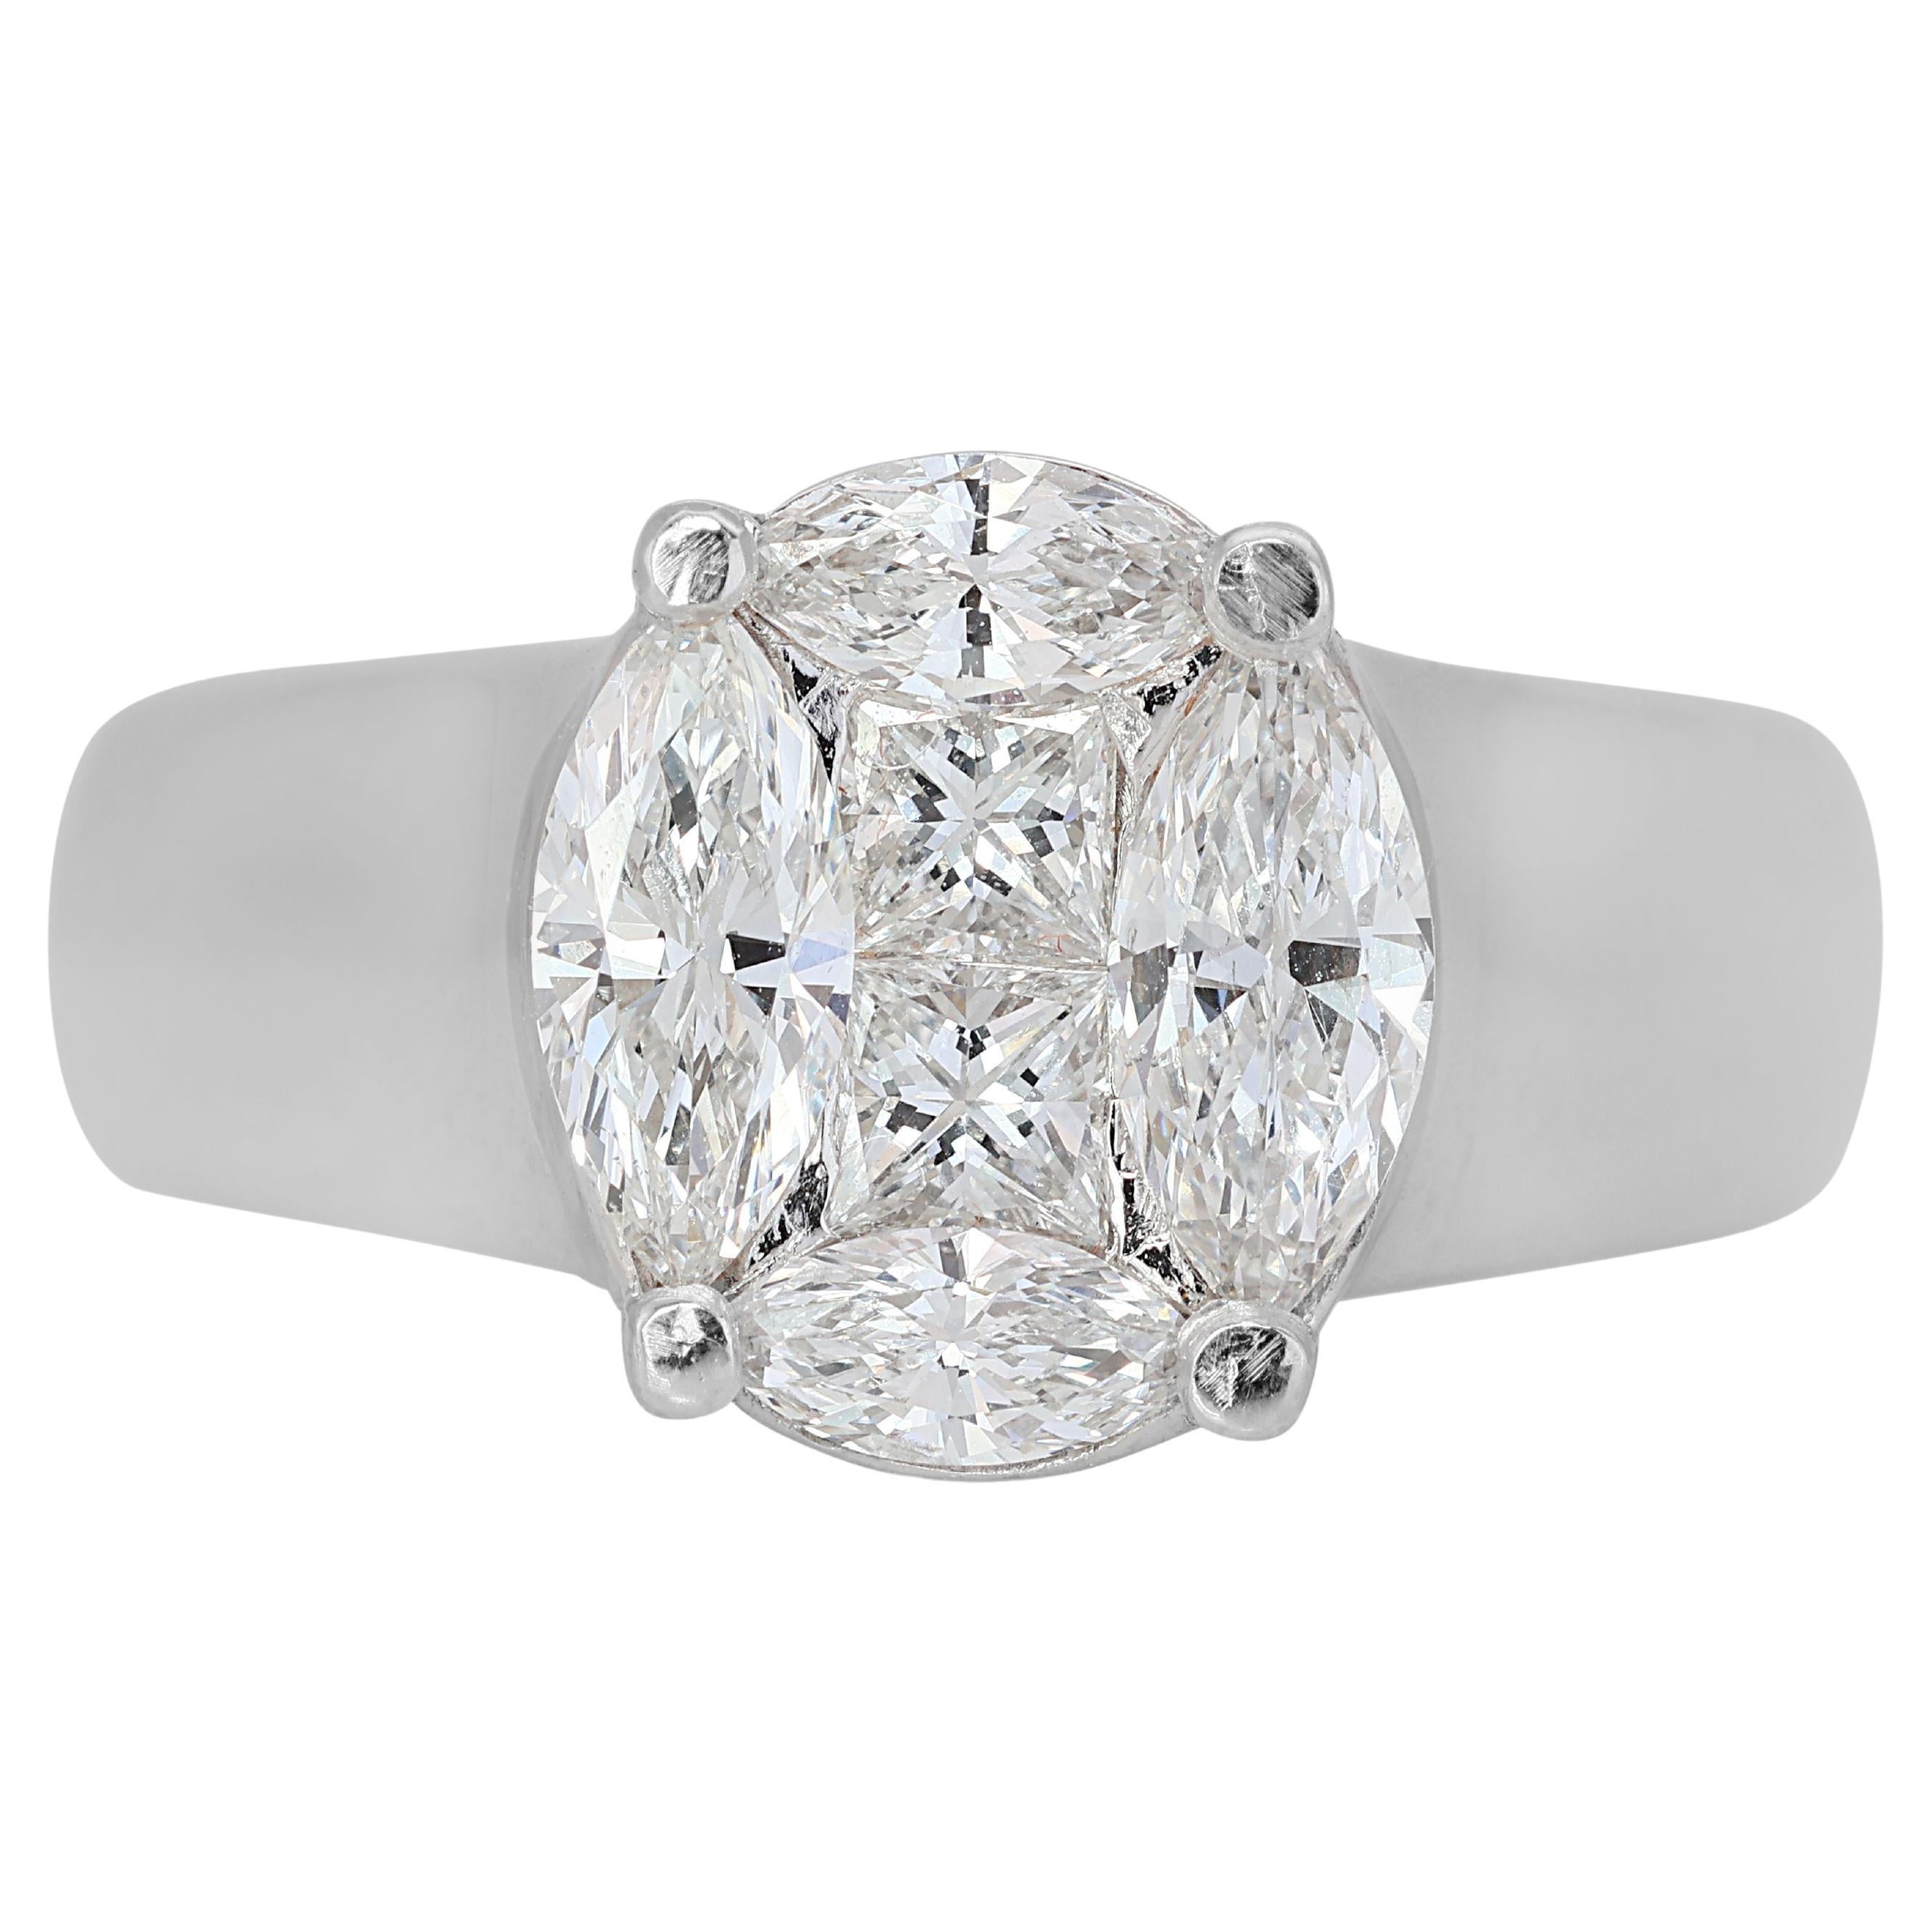 Dazzling 18k White Gold Solitaire Ring with 0.98 ct Natural Diamonds IGI Cert